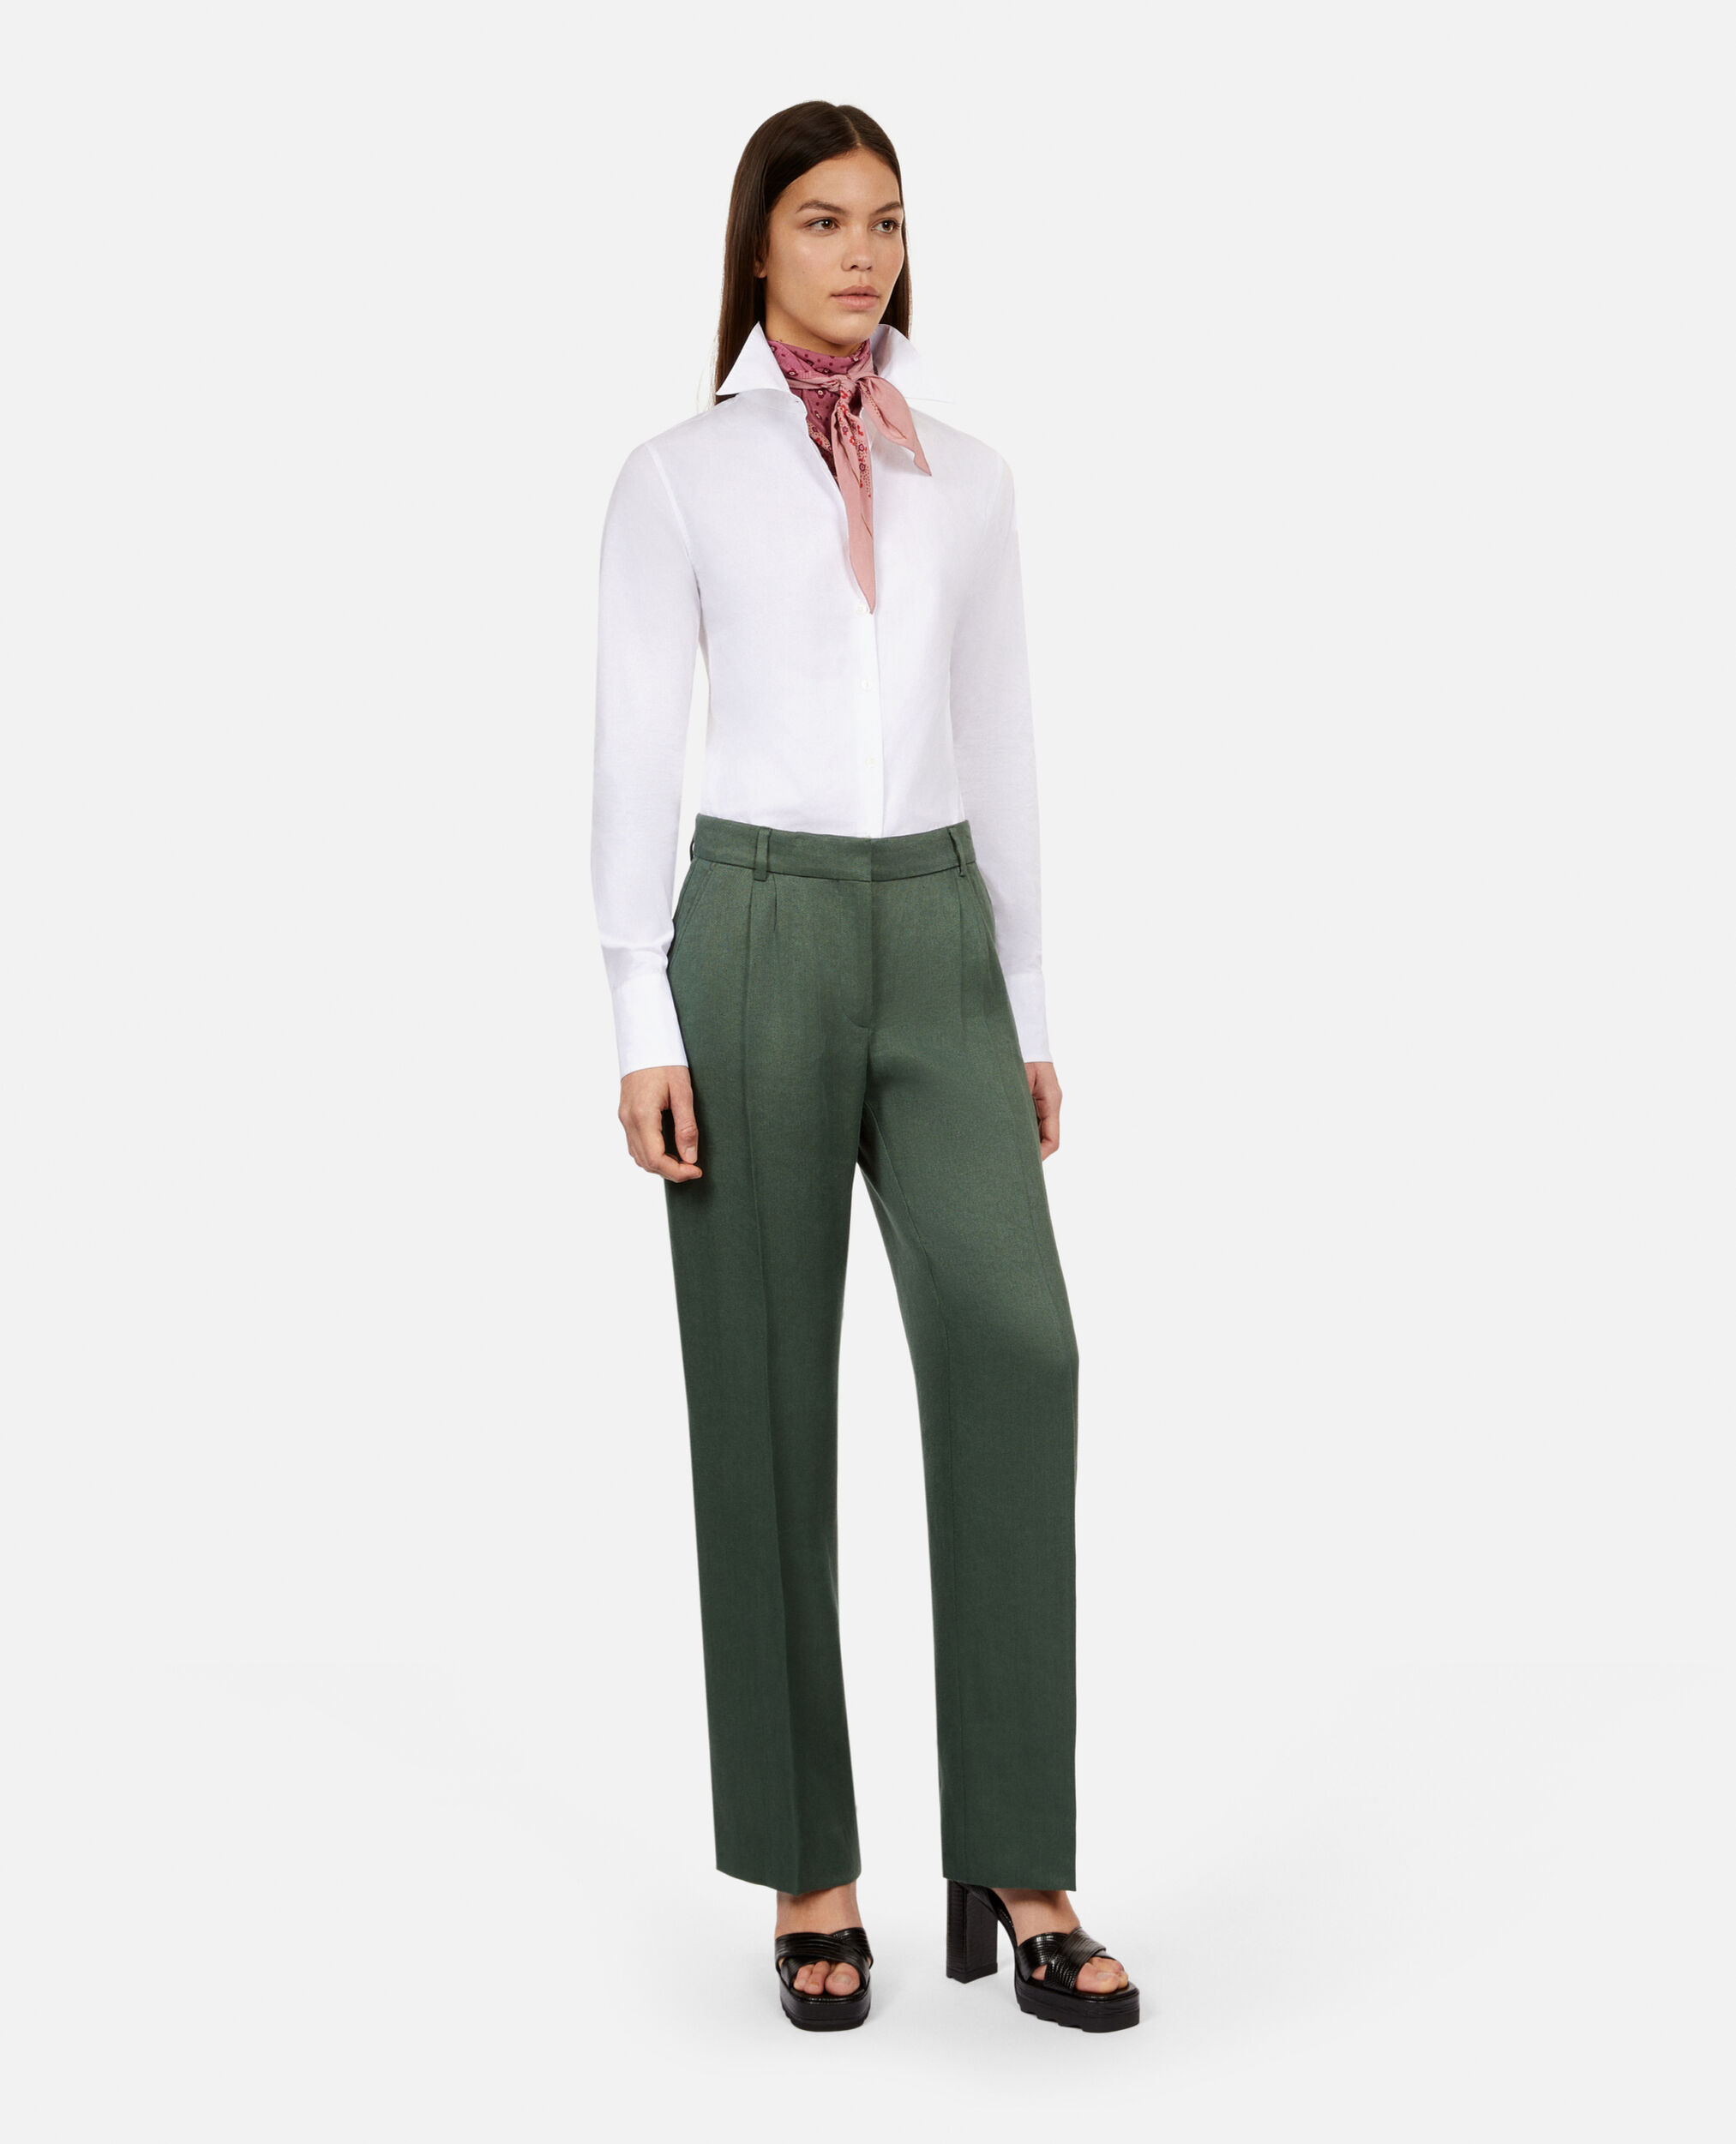 Green suit trousers, WOOD KAKI, hi-res image number null